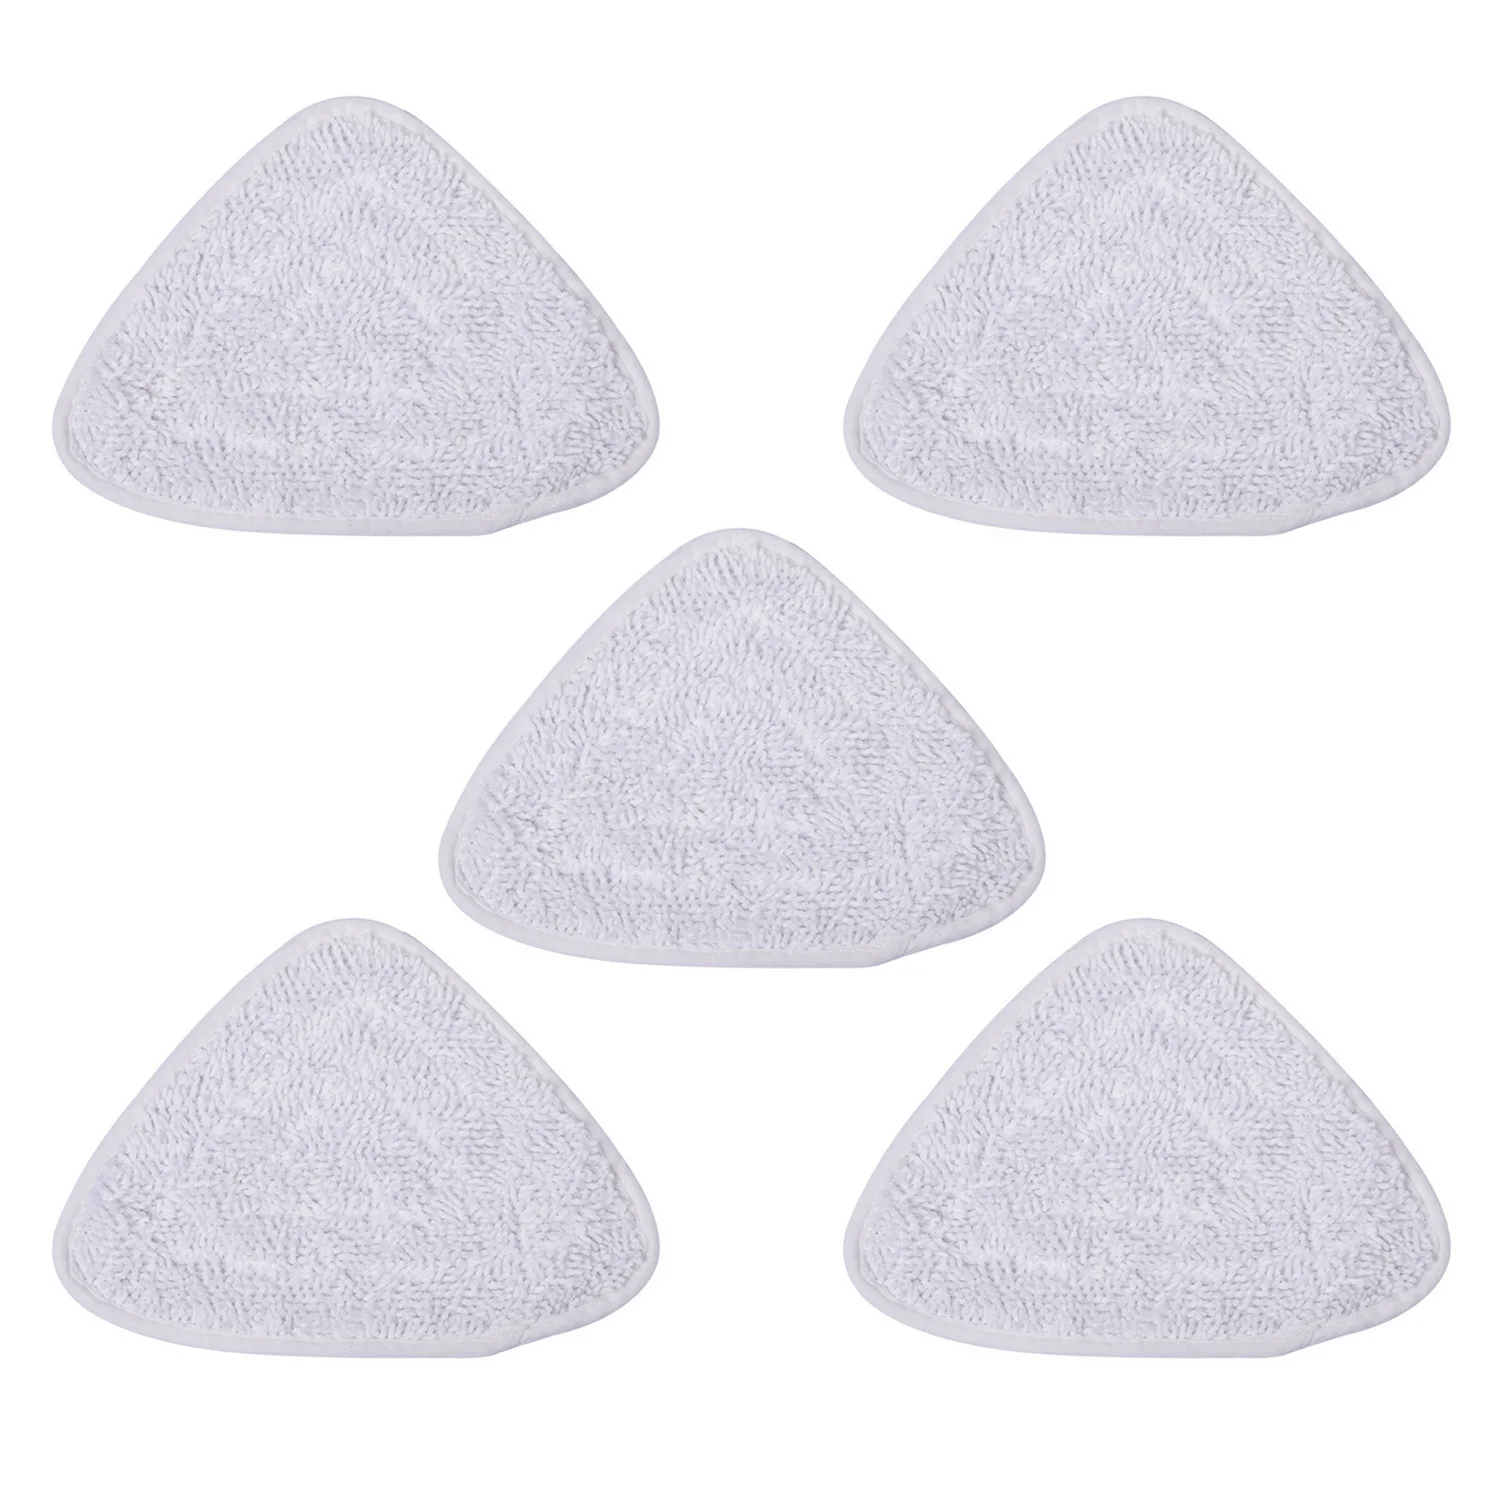 

5pcs Replacement Microfiber Mop Pads Washable Reusable Mop Refill for Vileda Hot Spray Steam Mop Cleaning Floor Tool